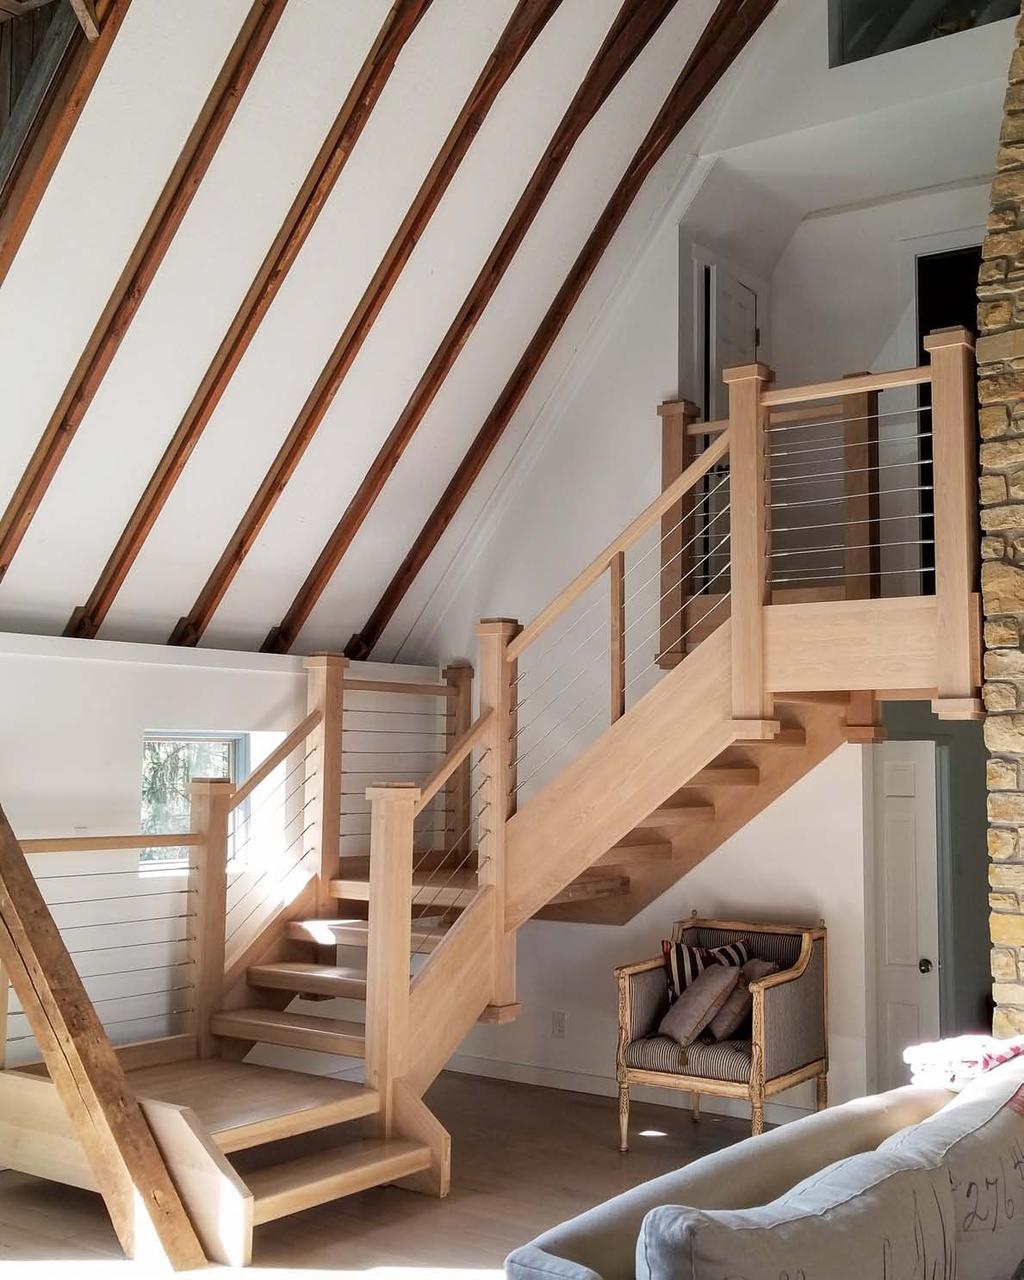 2018 StairCraft Awards Aesthetic value: Stairway provides a transitional flavored focal point to this barn that was renovated into a house.